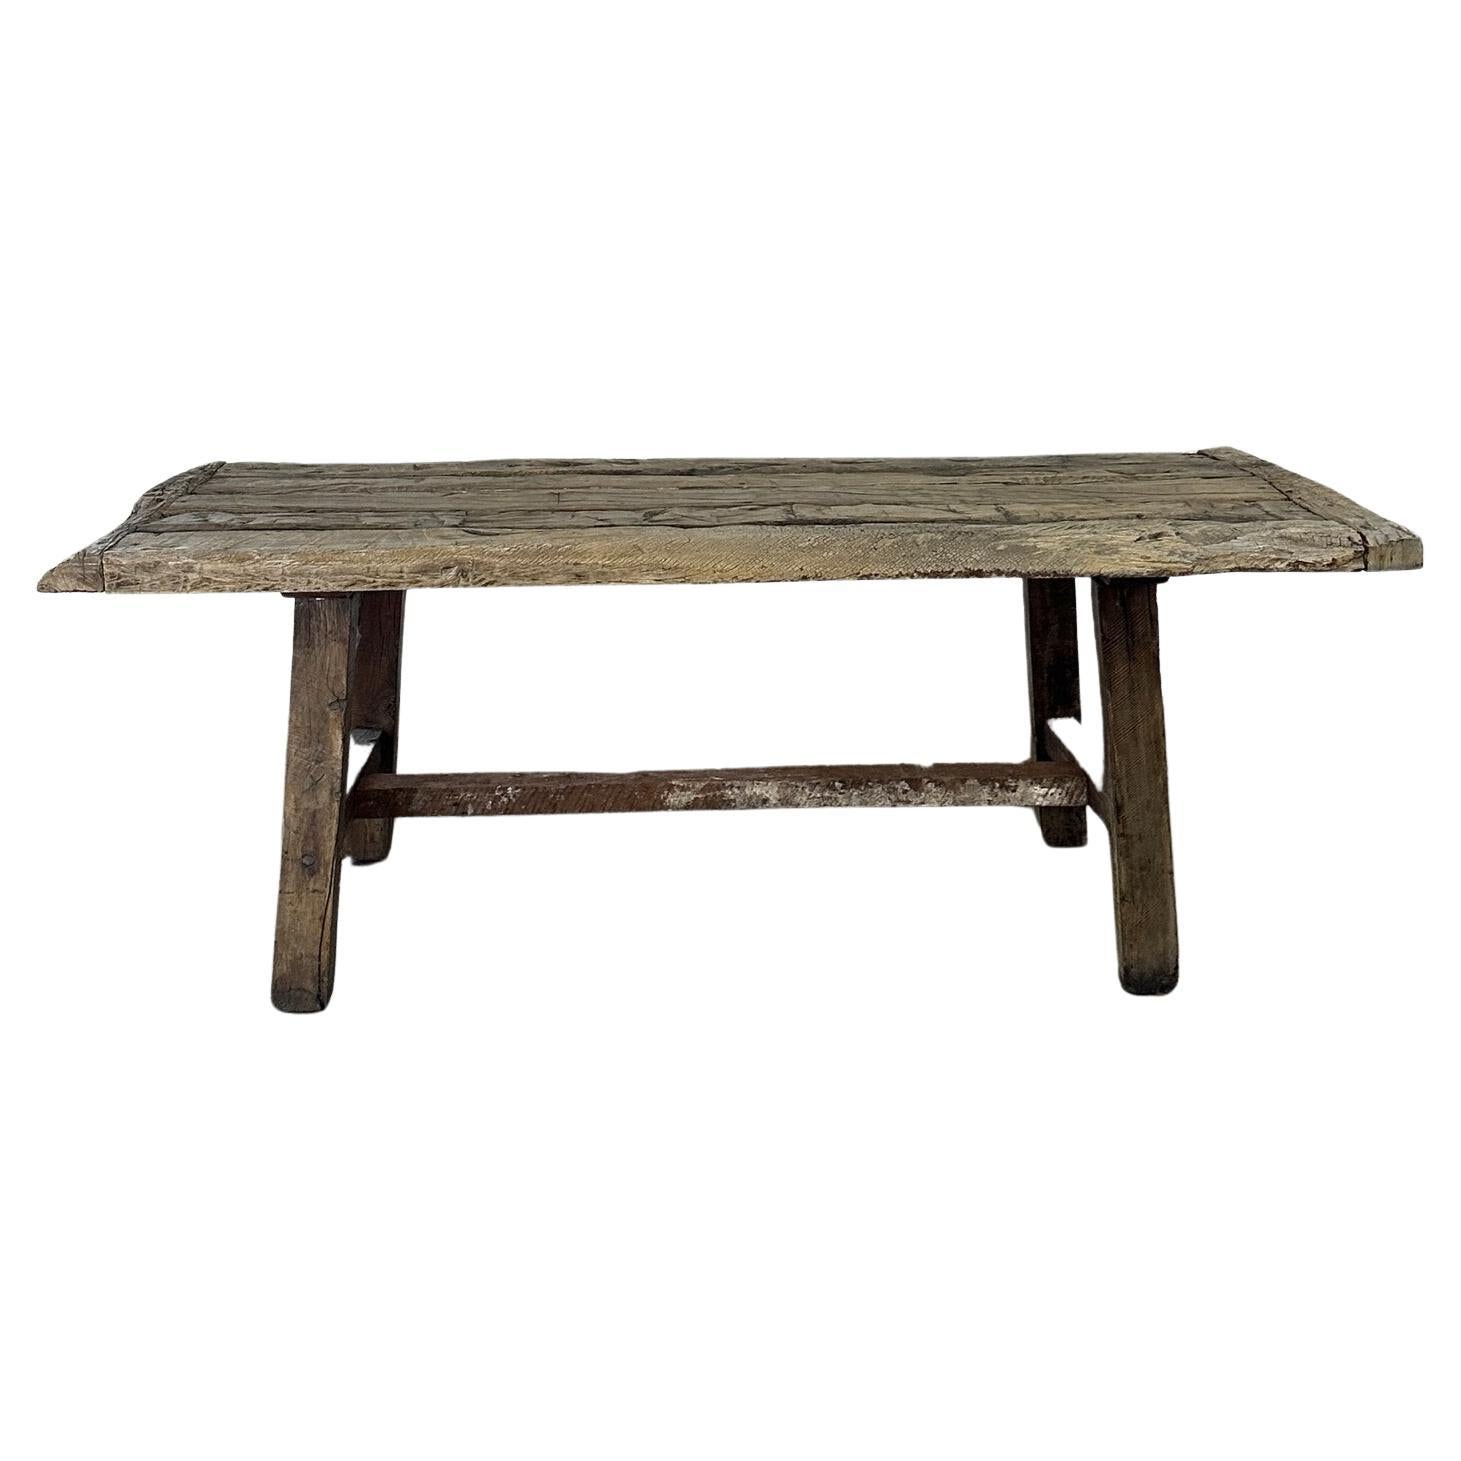 Early Primitive dining table For Sale